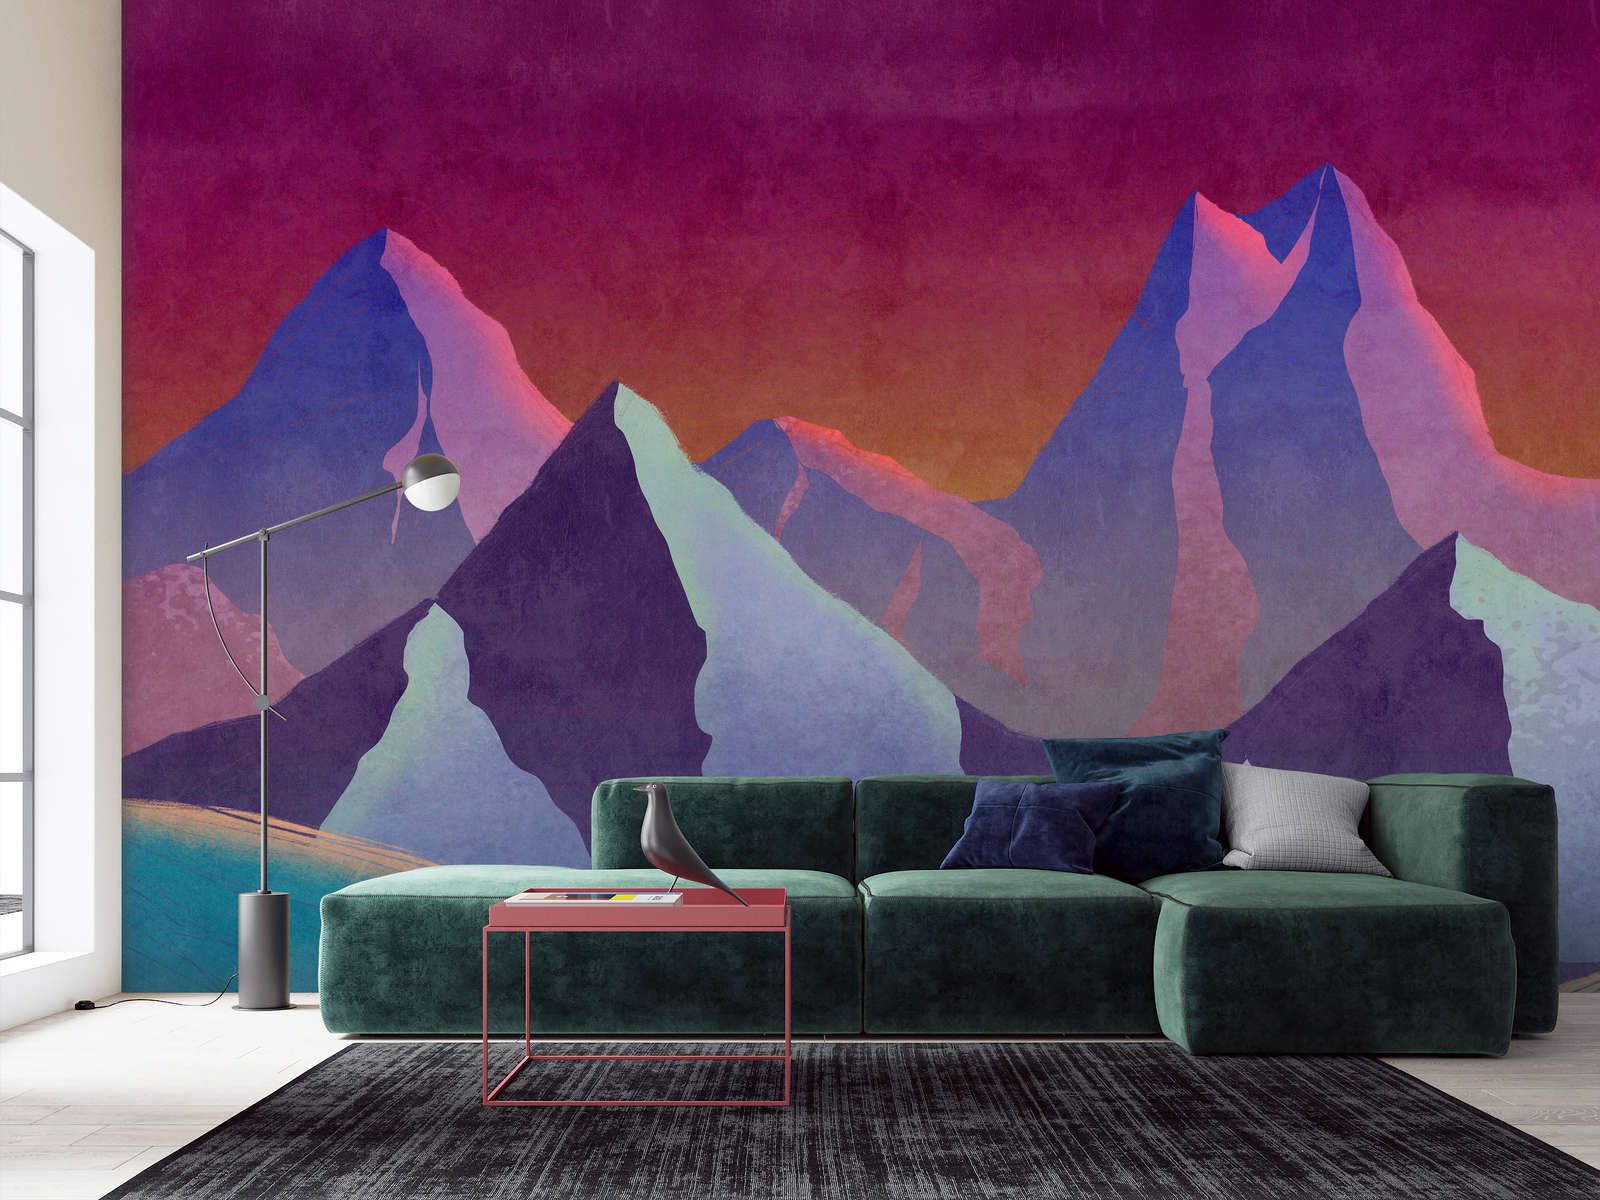             Photo wallpaper »altitude 1« - Abstract mountains in neon colours with vintage plaster texture - Smooth, slightly pearlescent non-woven fabric
        